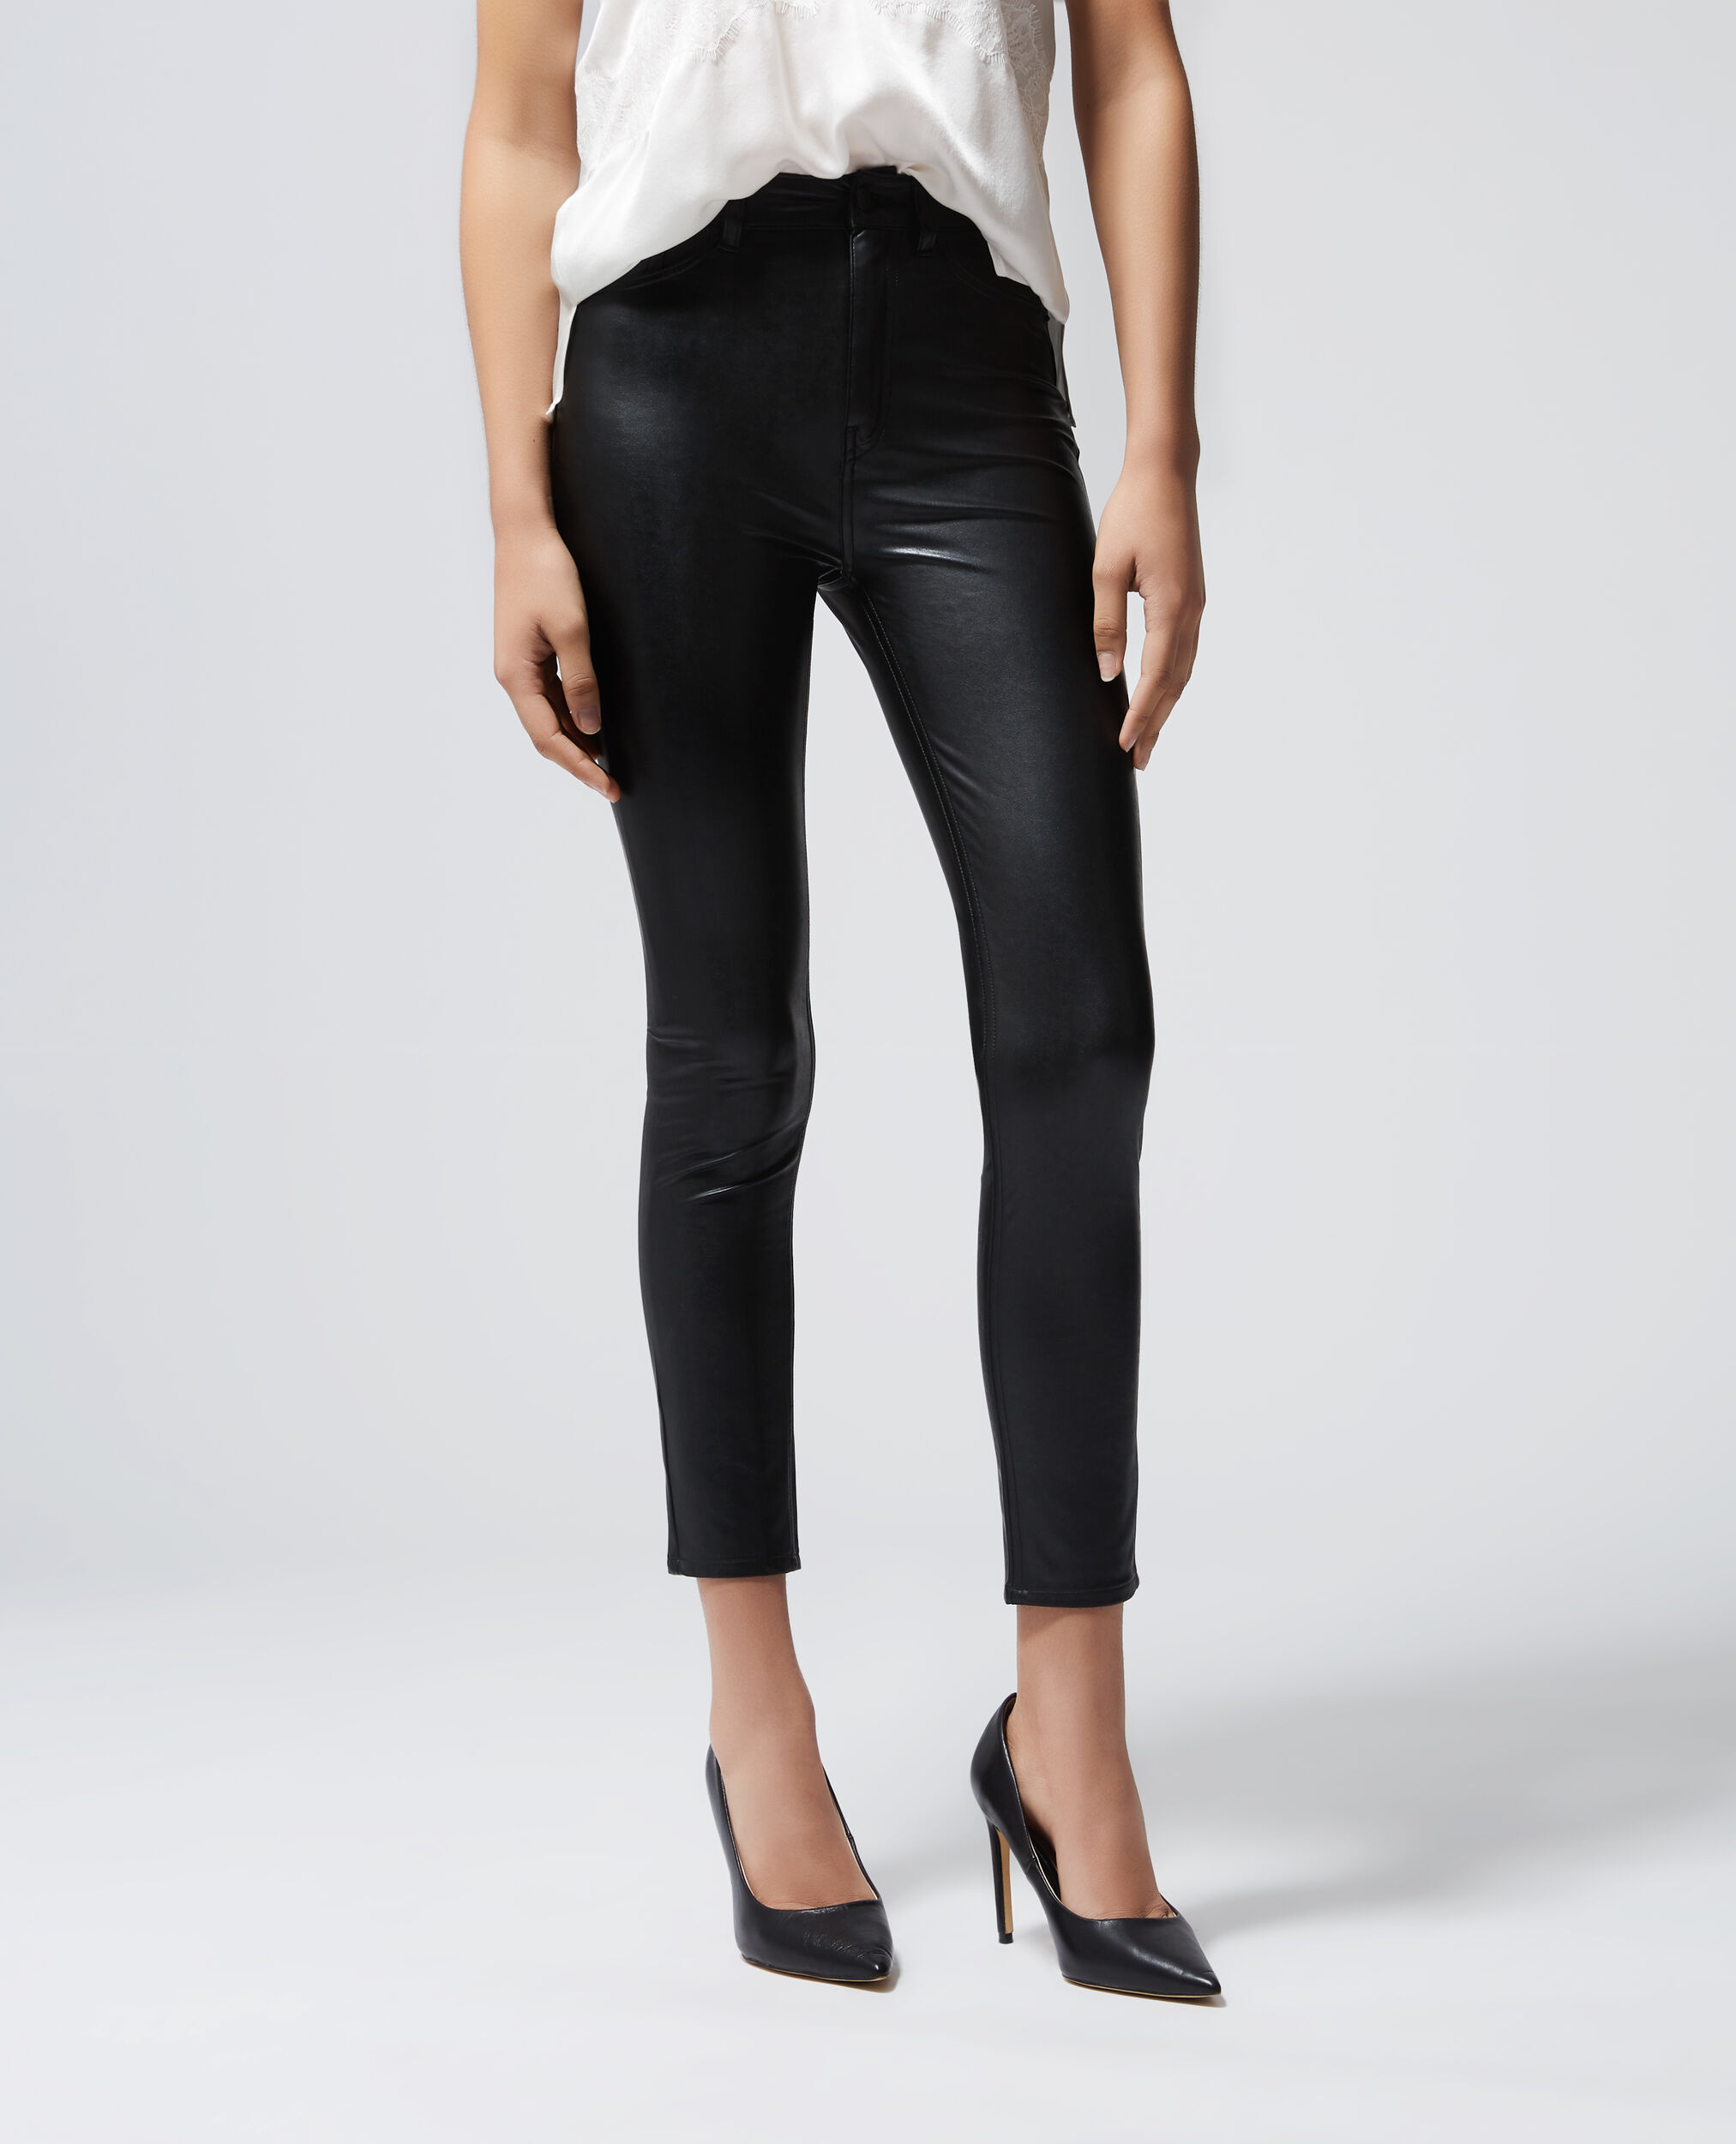 Fitted jean-style black trousers, BLACK, hi-res image number null